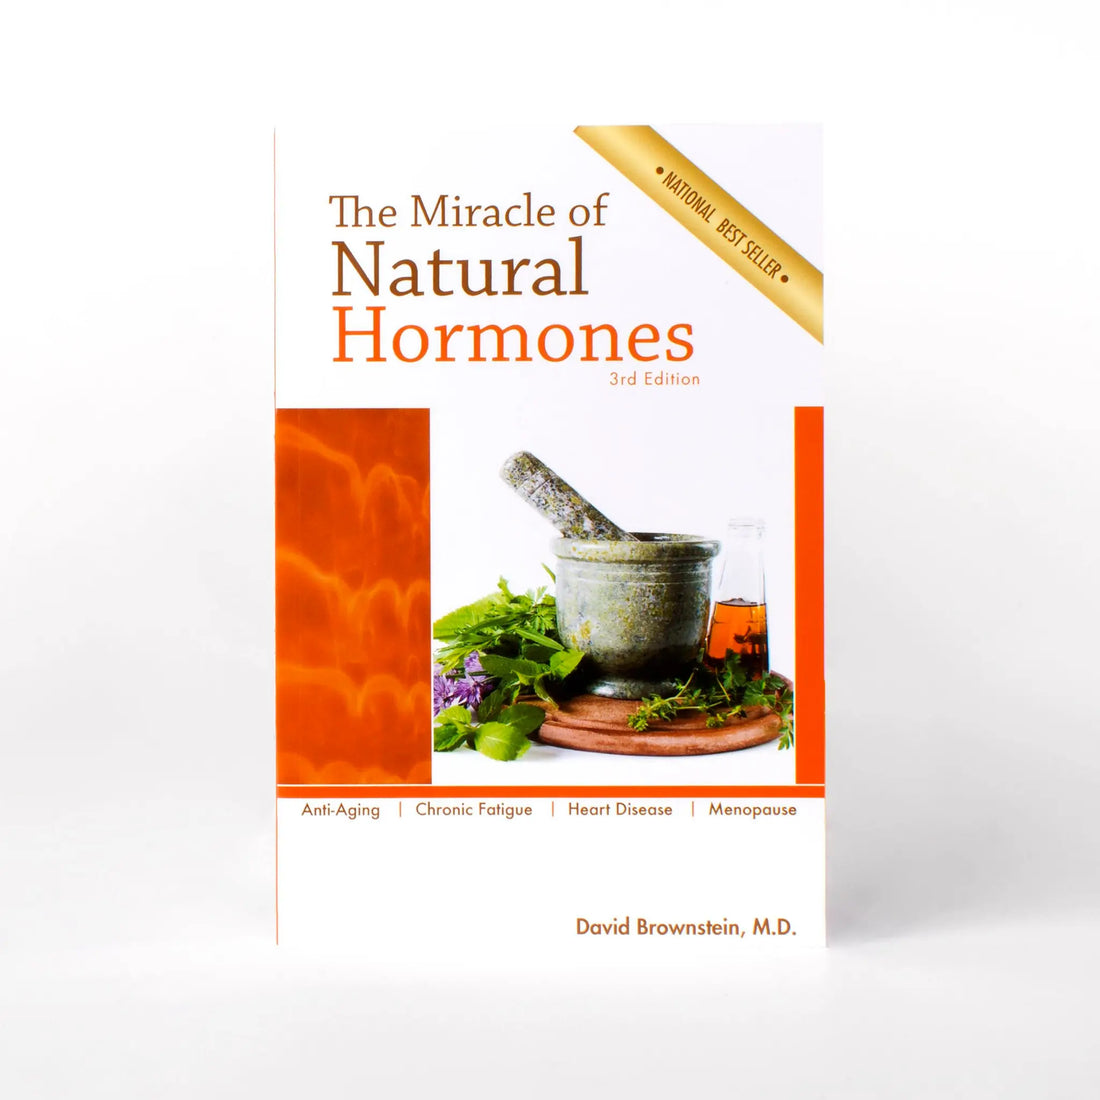 The Miracle of Natural Hormones by Dr. Brownstein